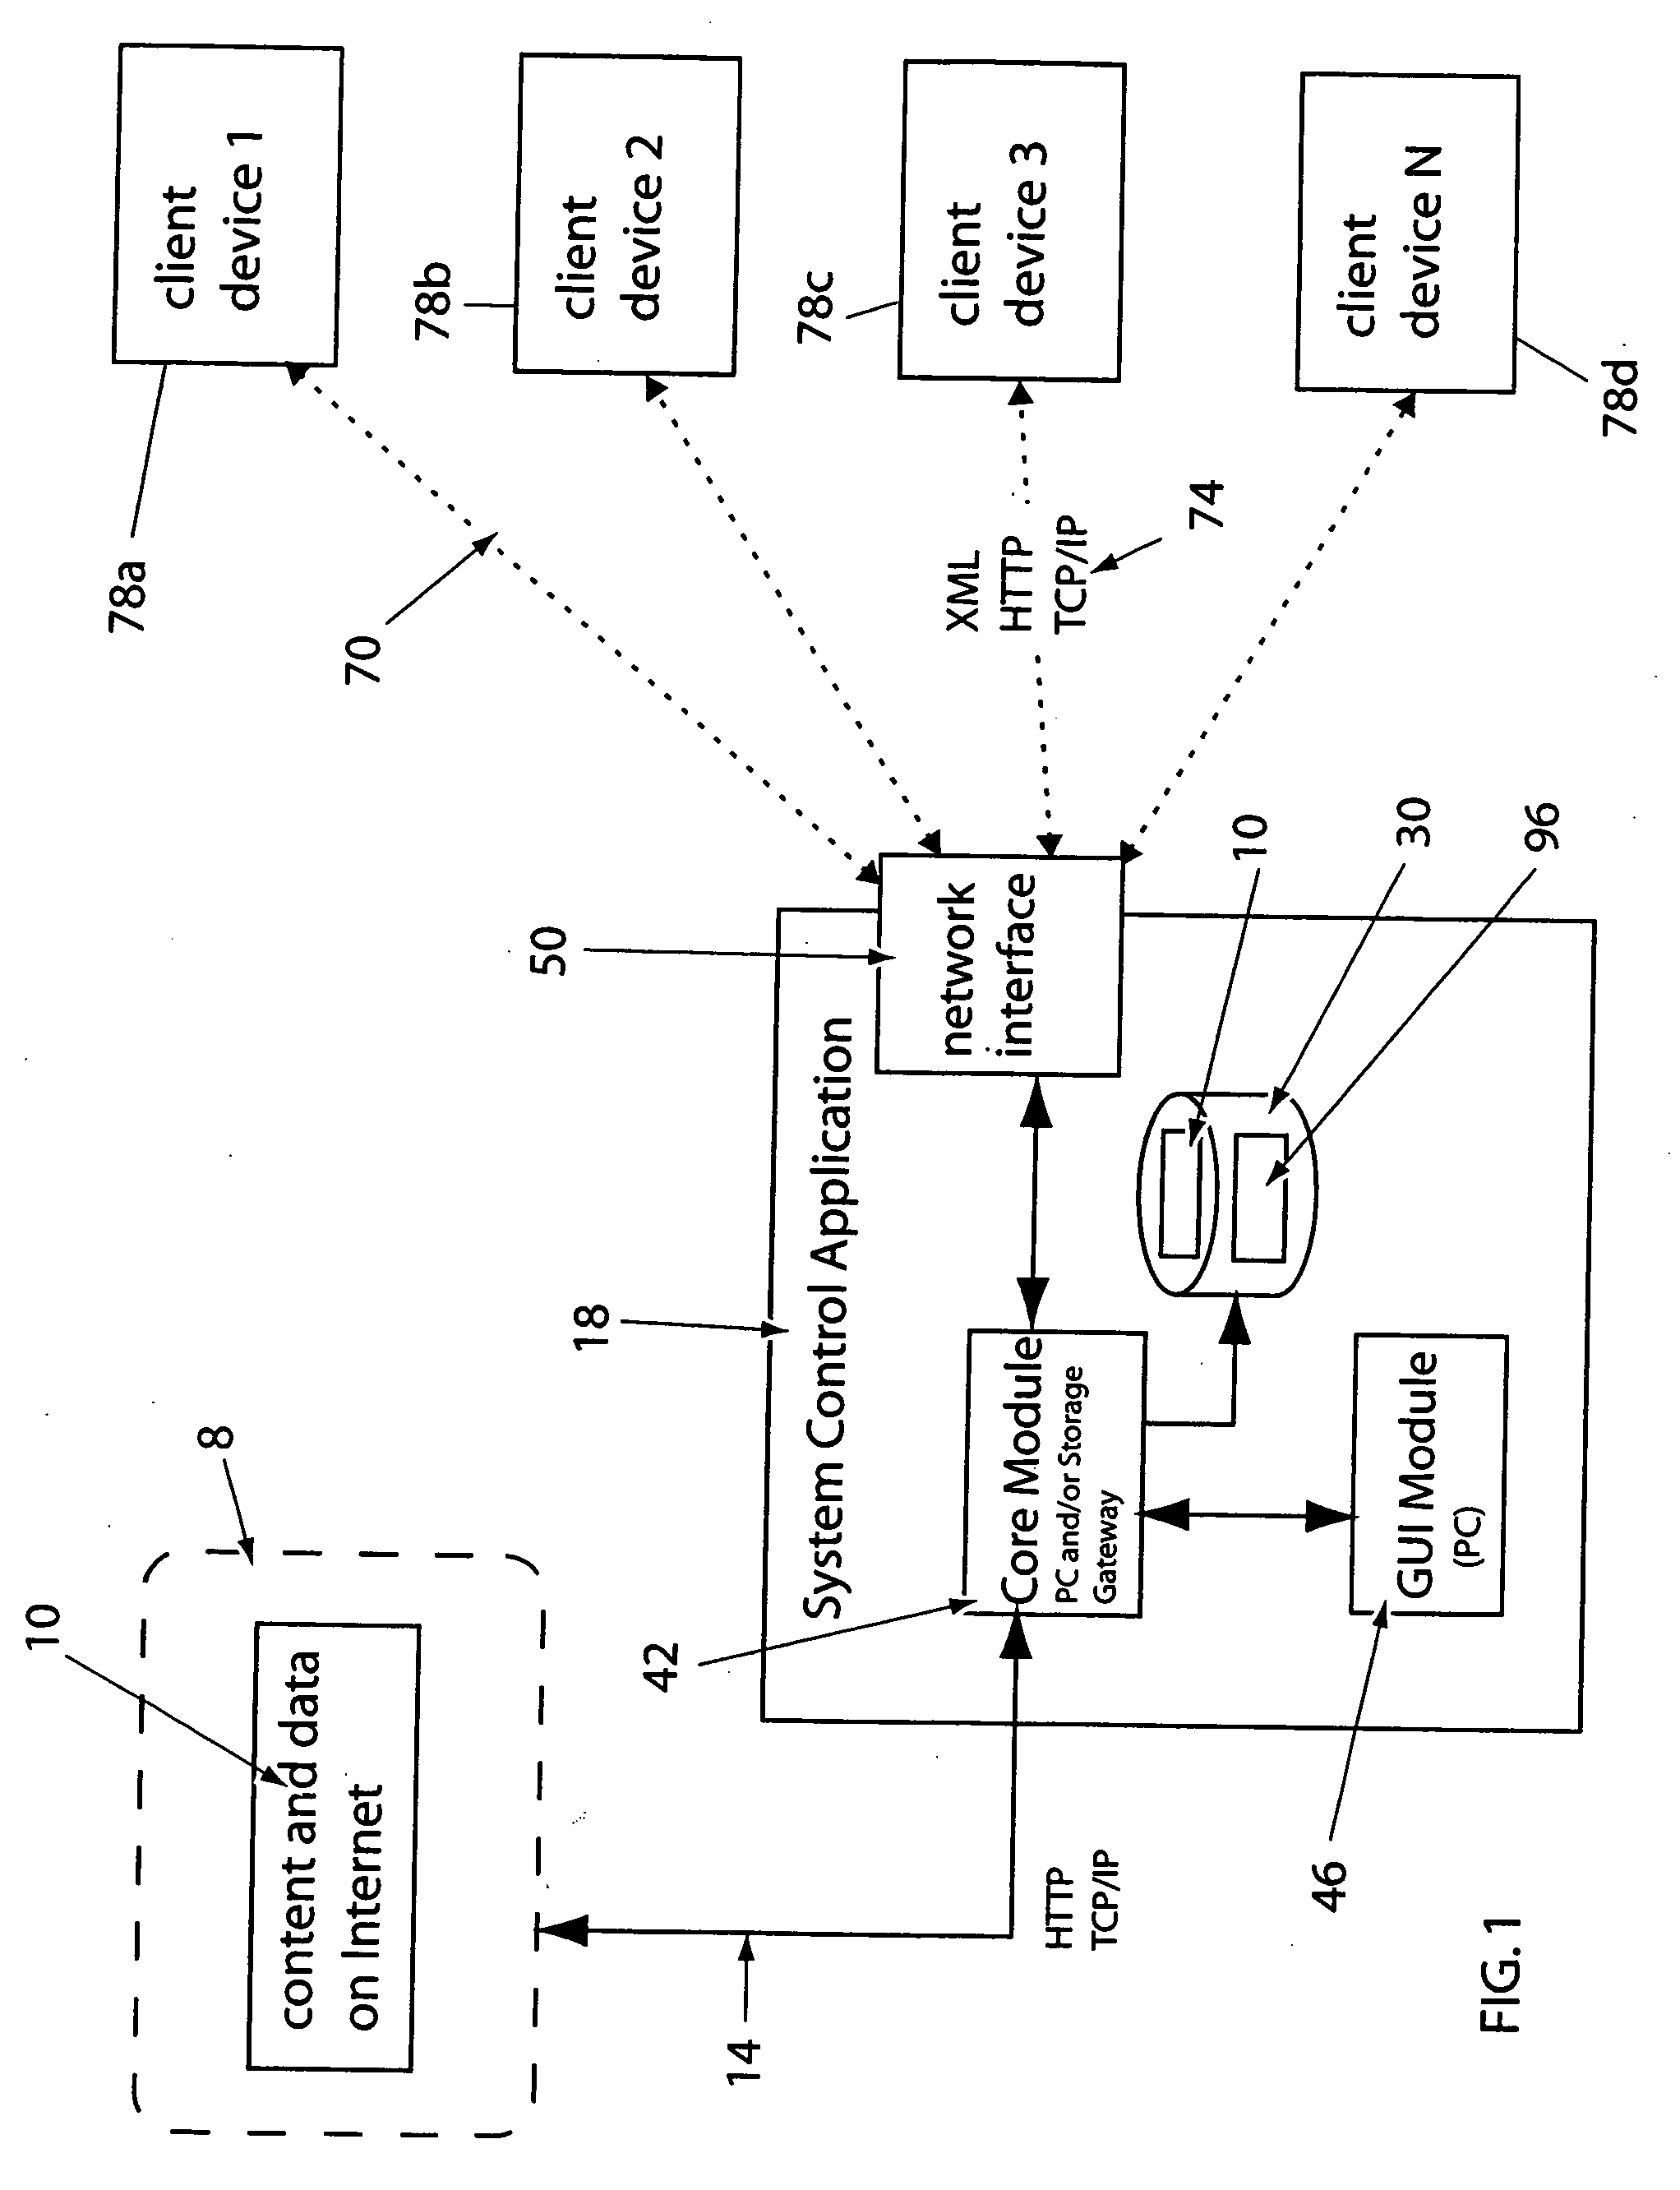 System and method for providing content, management, and interactivity for client devices